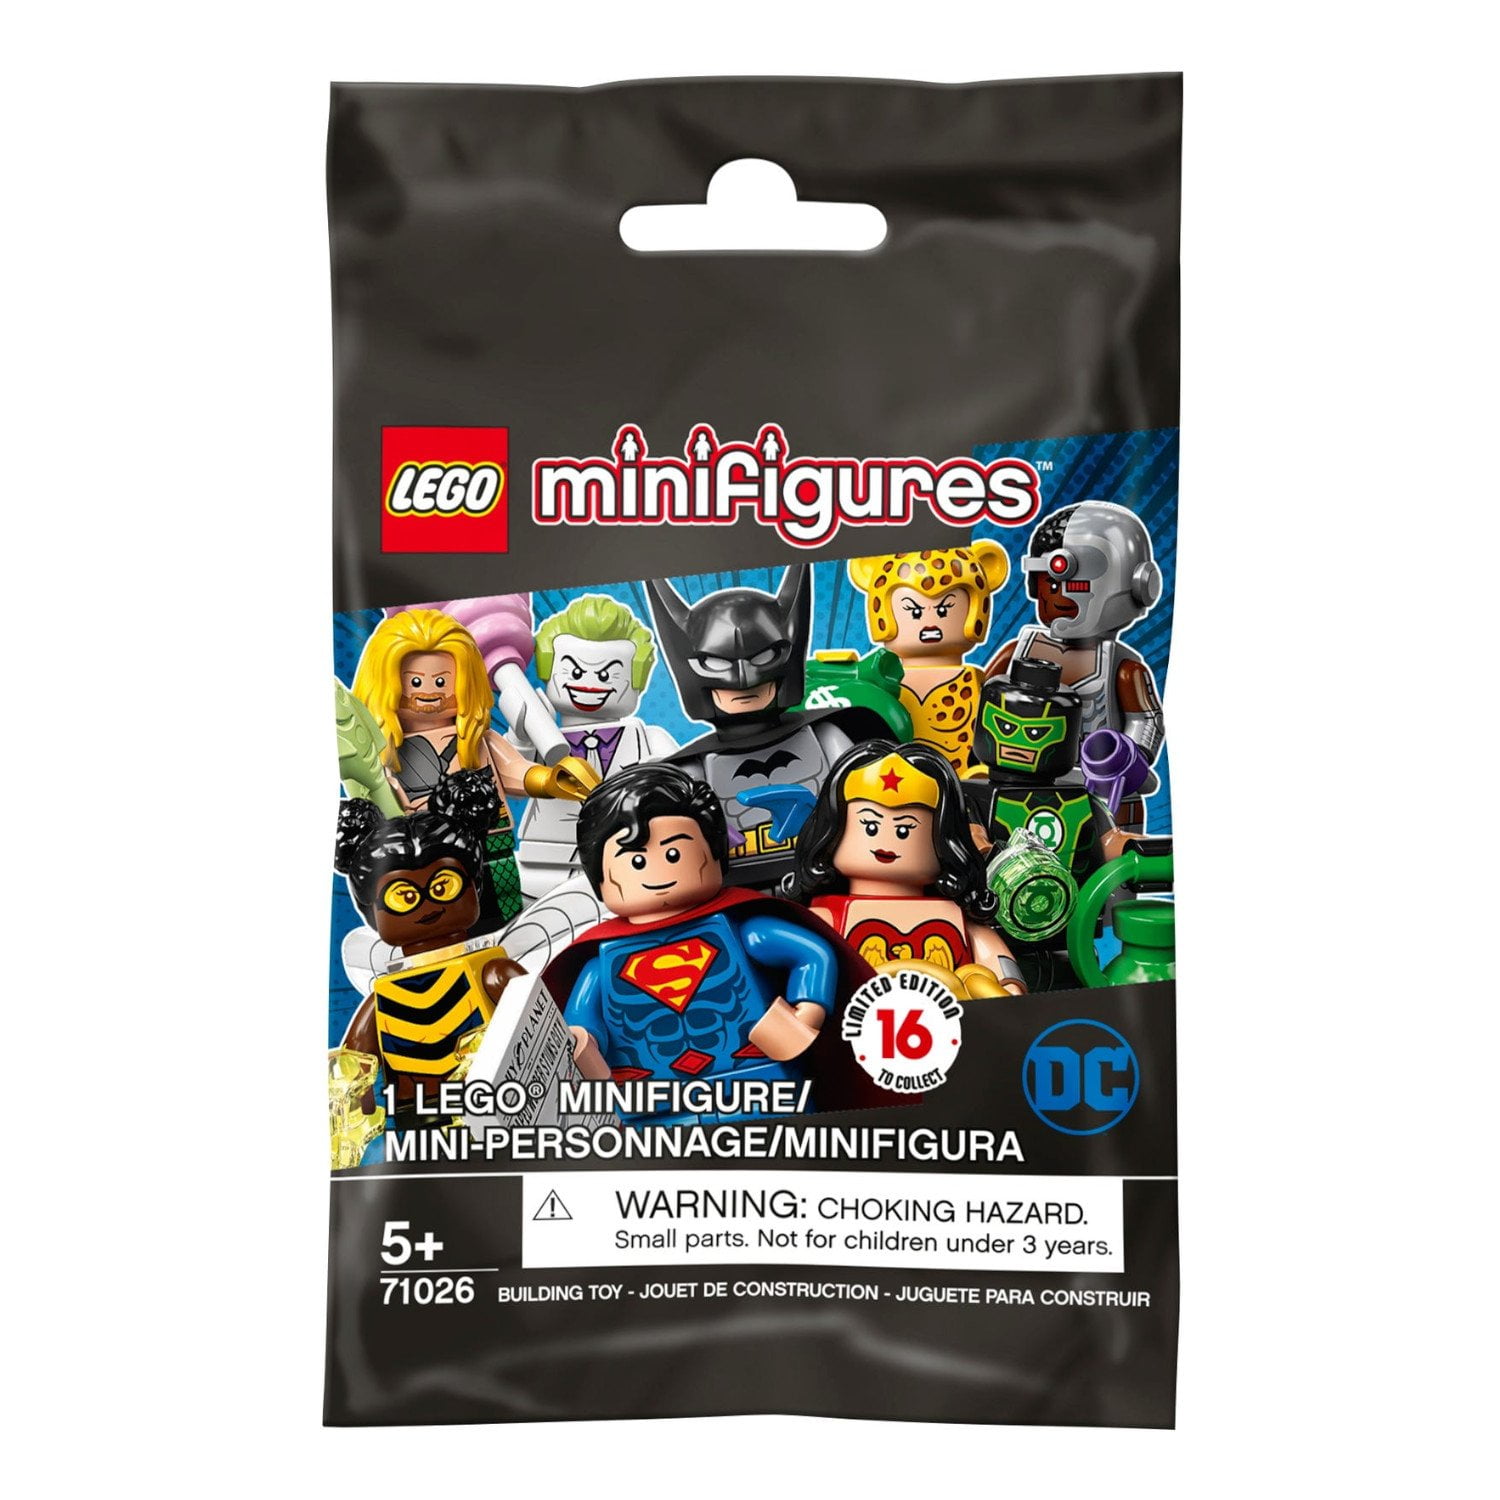 71026 New Sealed LEGO® DC Super Heroes "THE FLASH" Series Minifigure 